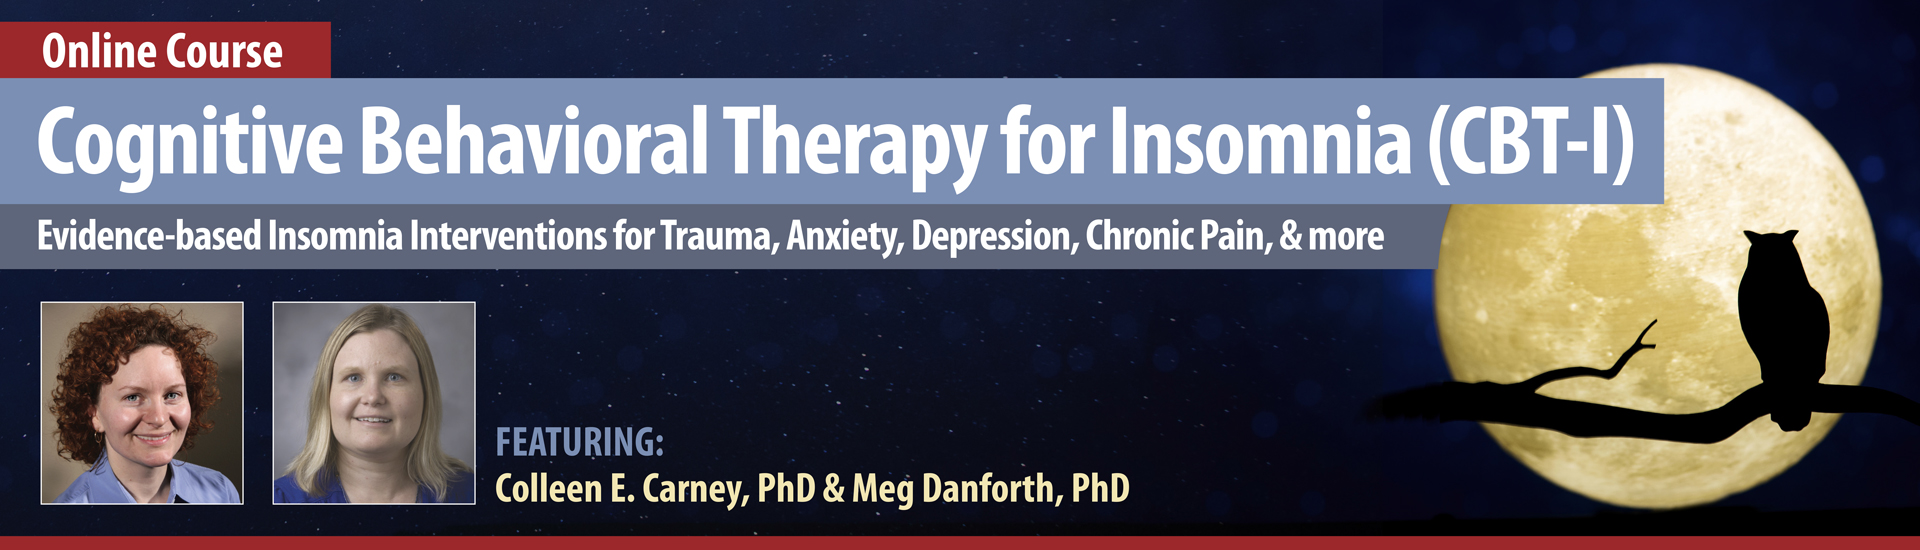 Cognitive Behavioral Therapy for Insomnia (CBT-I) Online Course